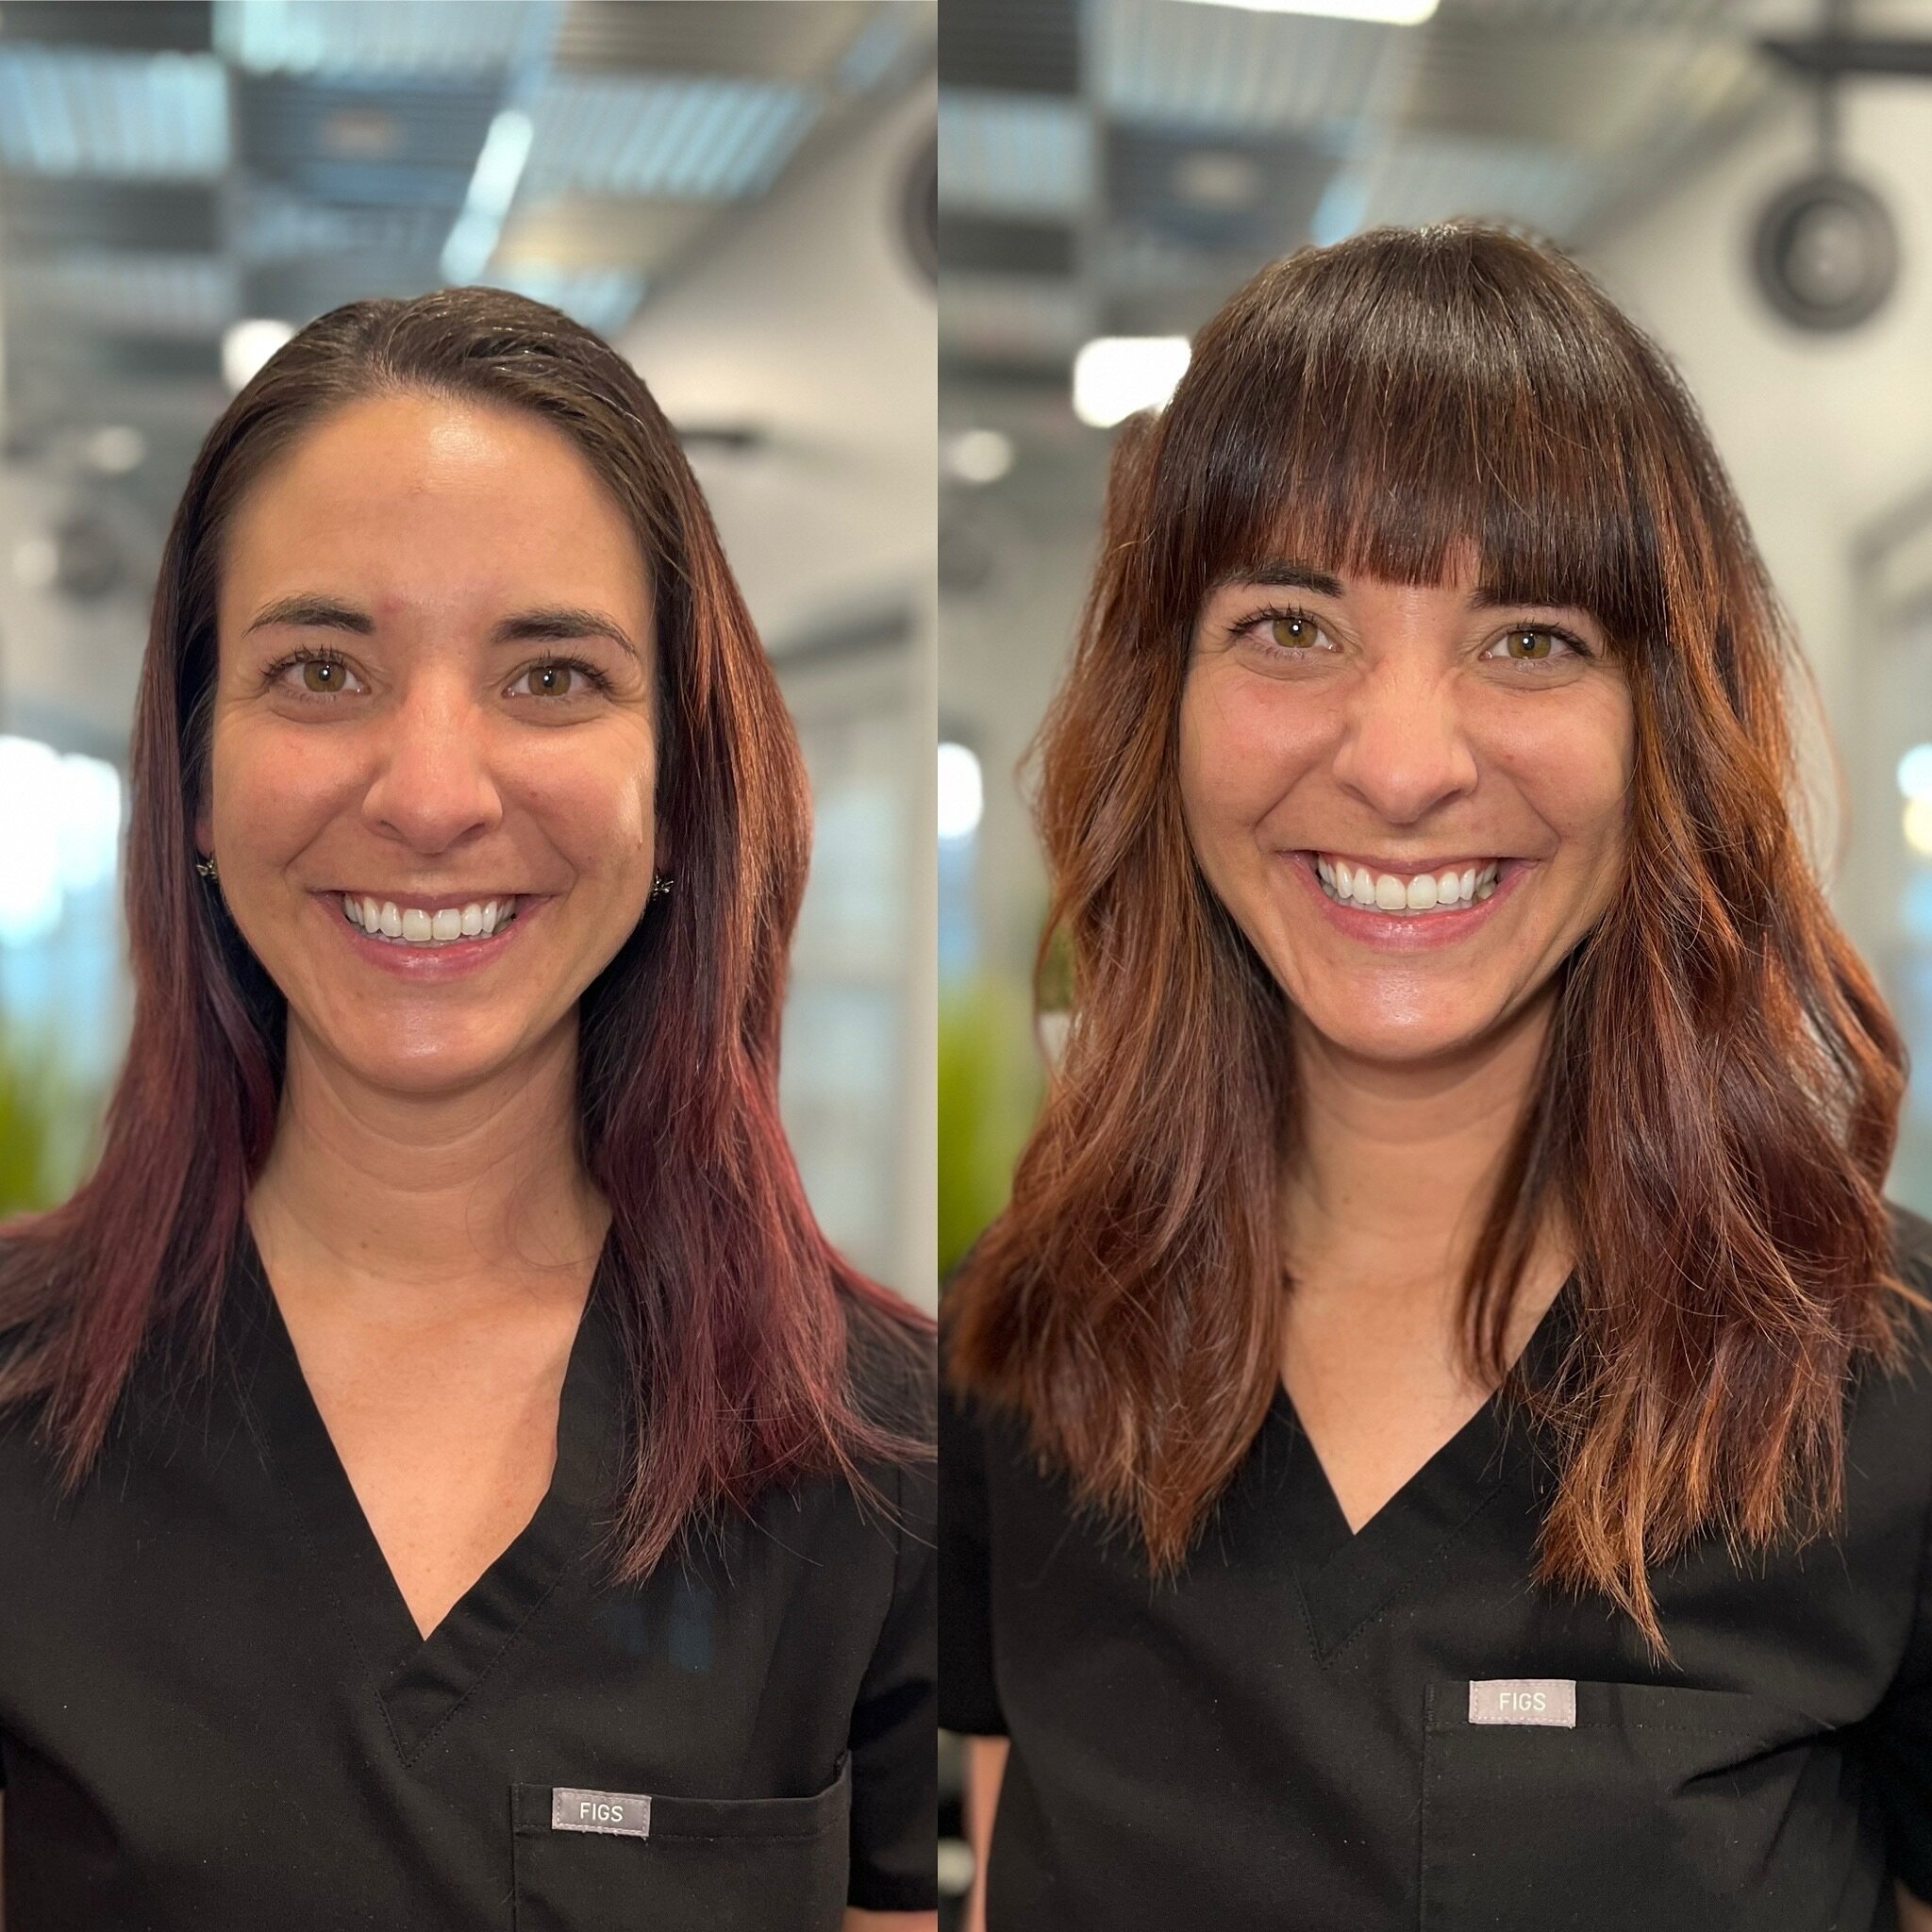 Kelly said &ldquo;give me bangs that make people wonder if I even have a forehead.&rdquo; Got you, girl.

We also did a color shift from violet to a warm brunette balayage because hey, why not?

Personally, I&rsquo;m loving the end result. What do yo